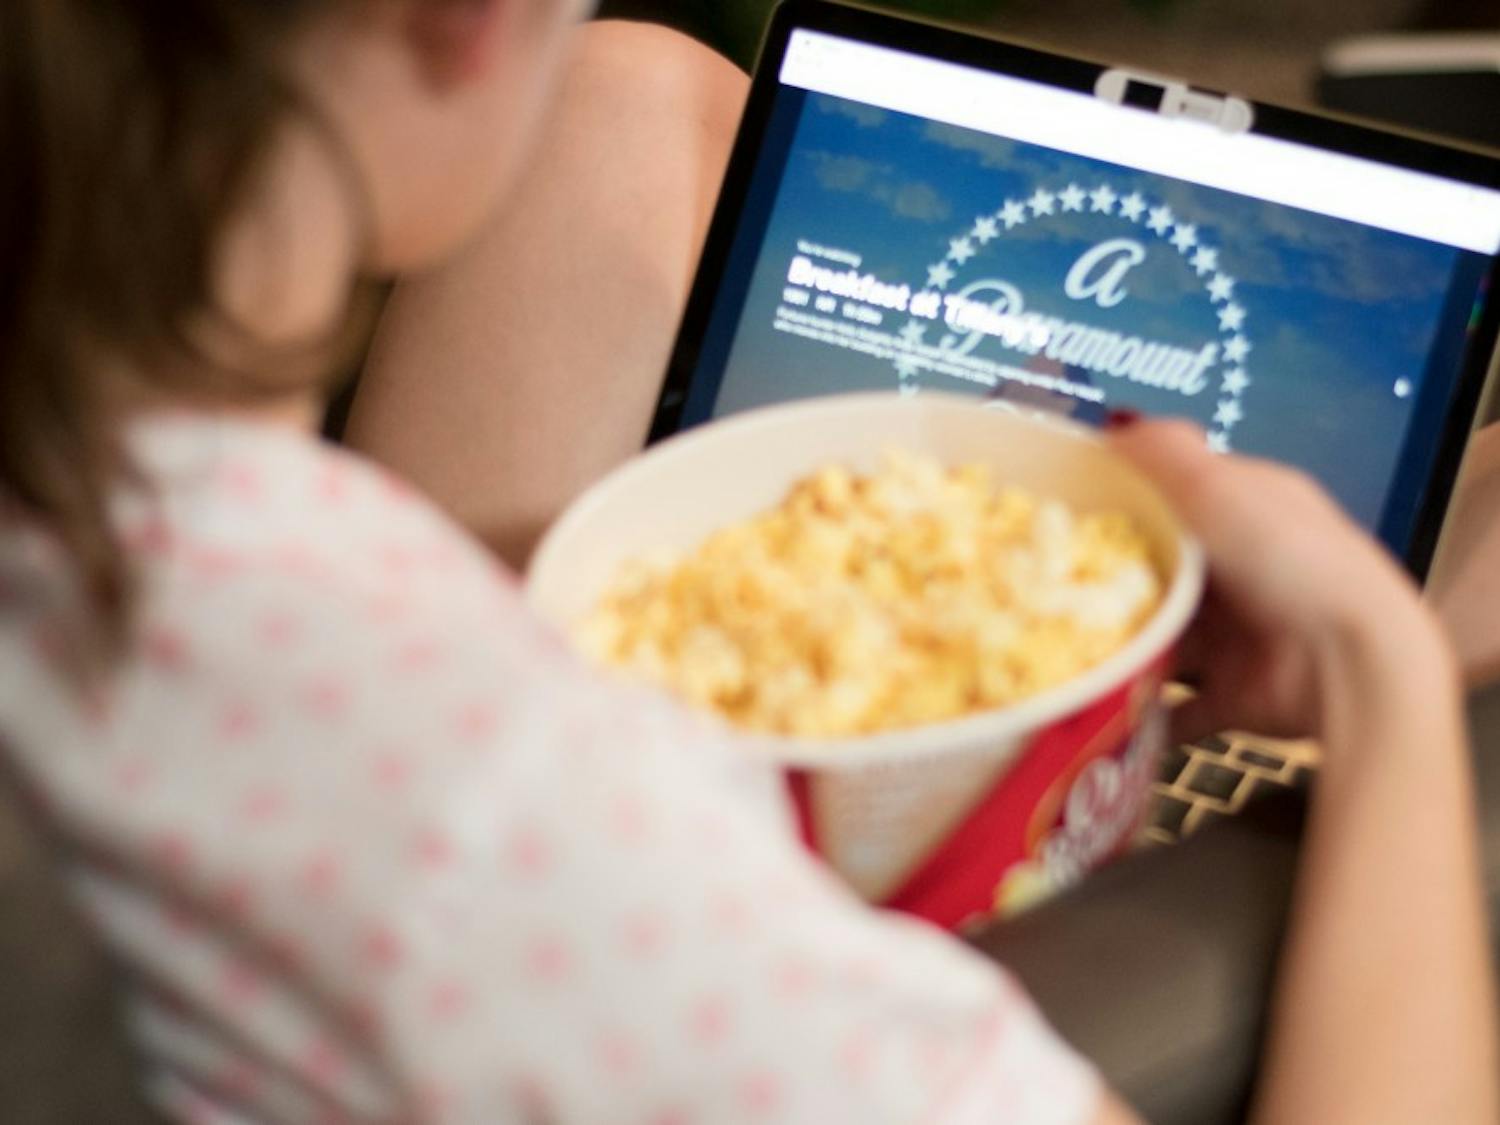 A student watches a movie on Netflix with a bowl of popcorn on Monday, Feb. 5, 2018, in Auburn, Ala.